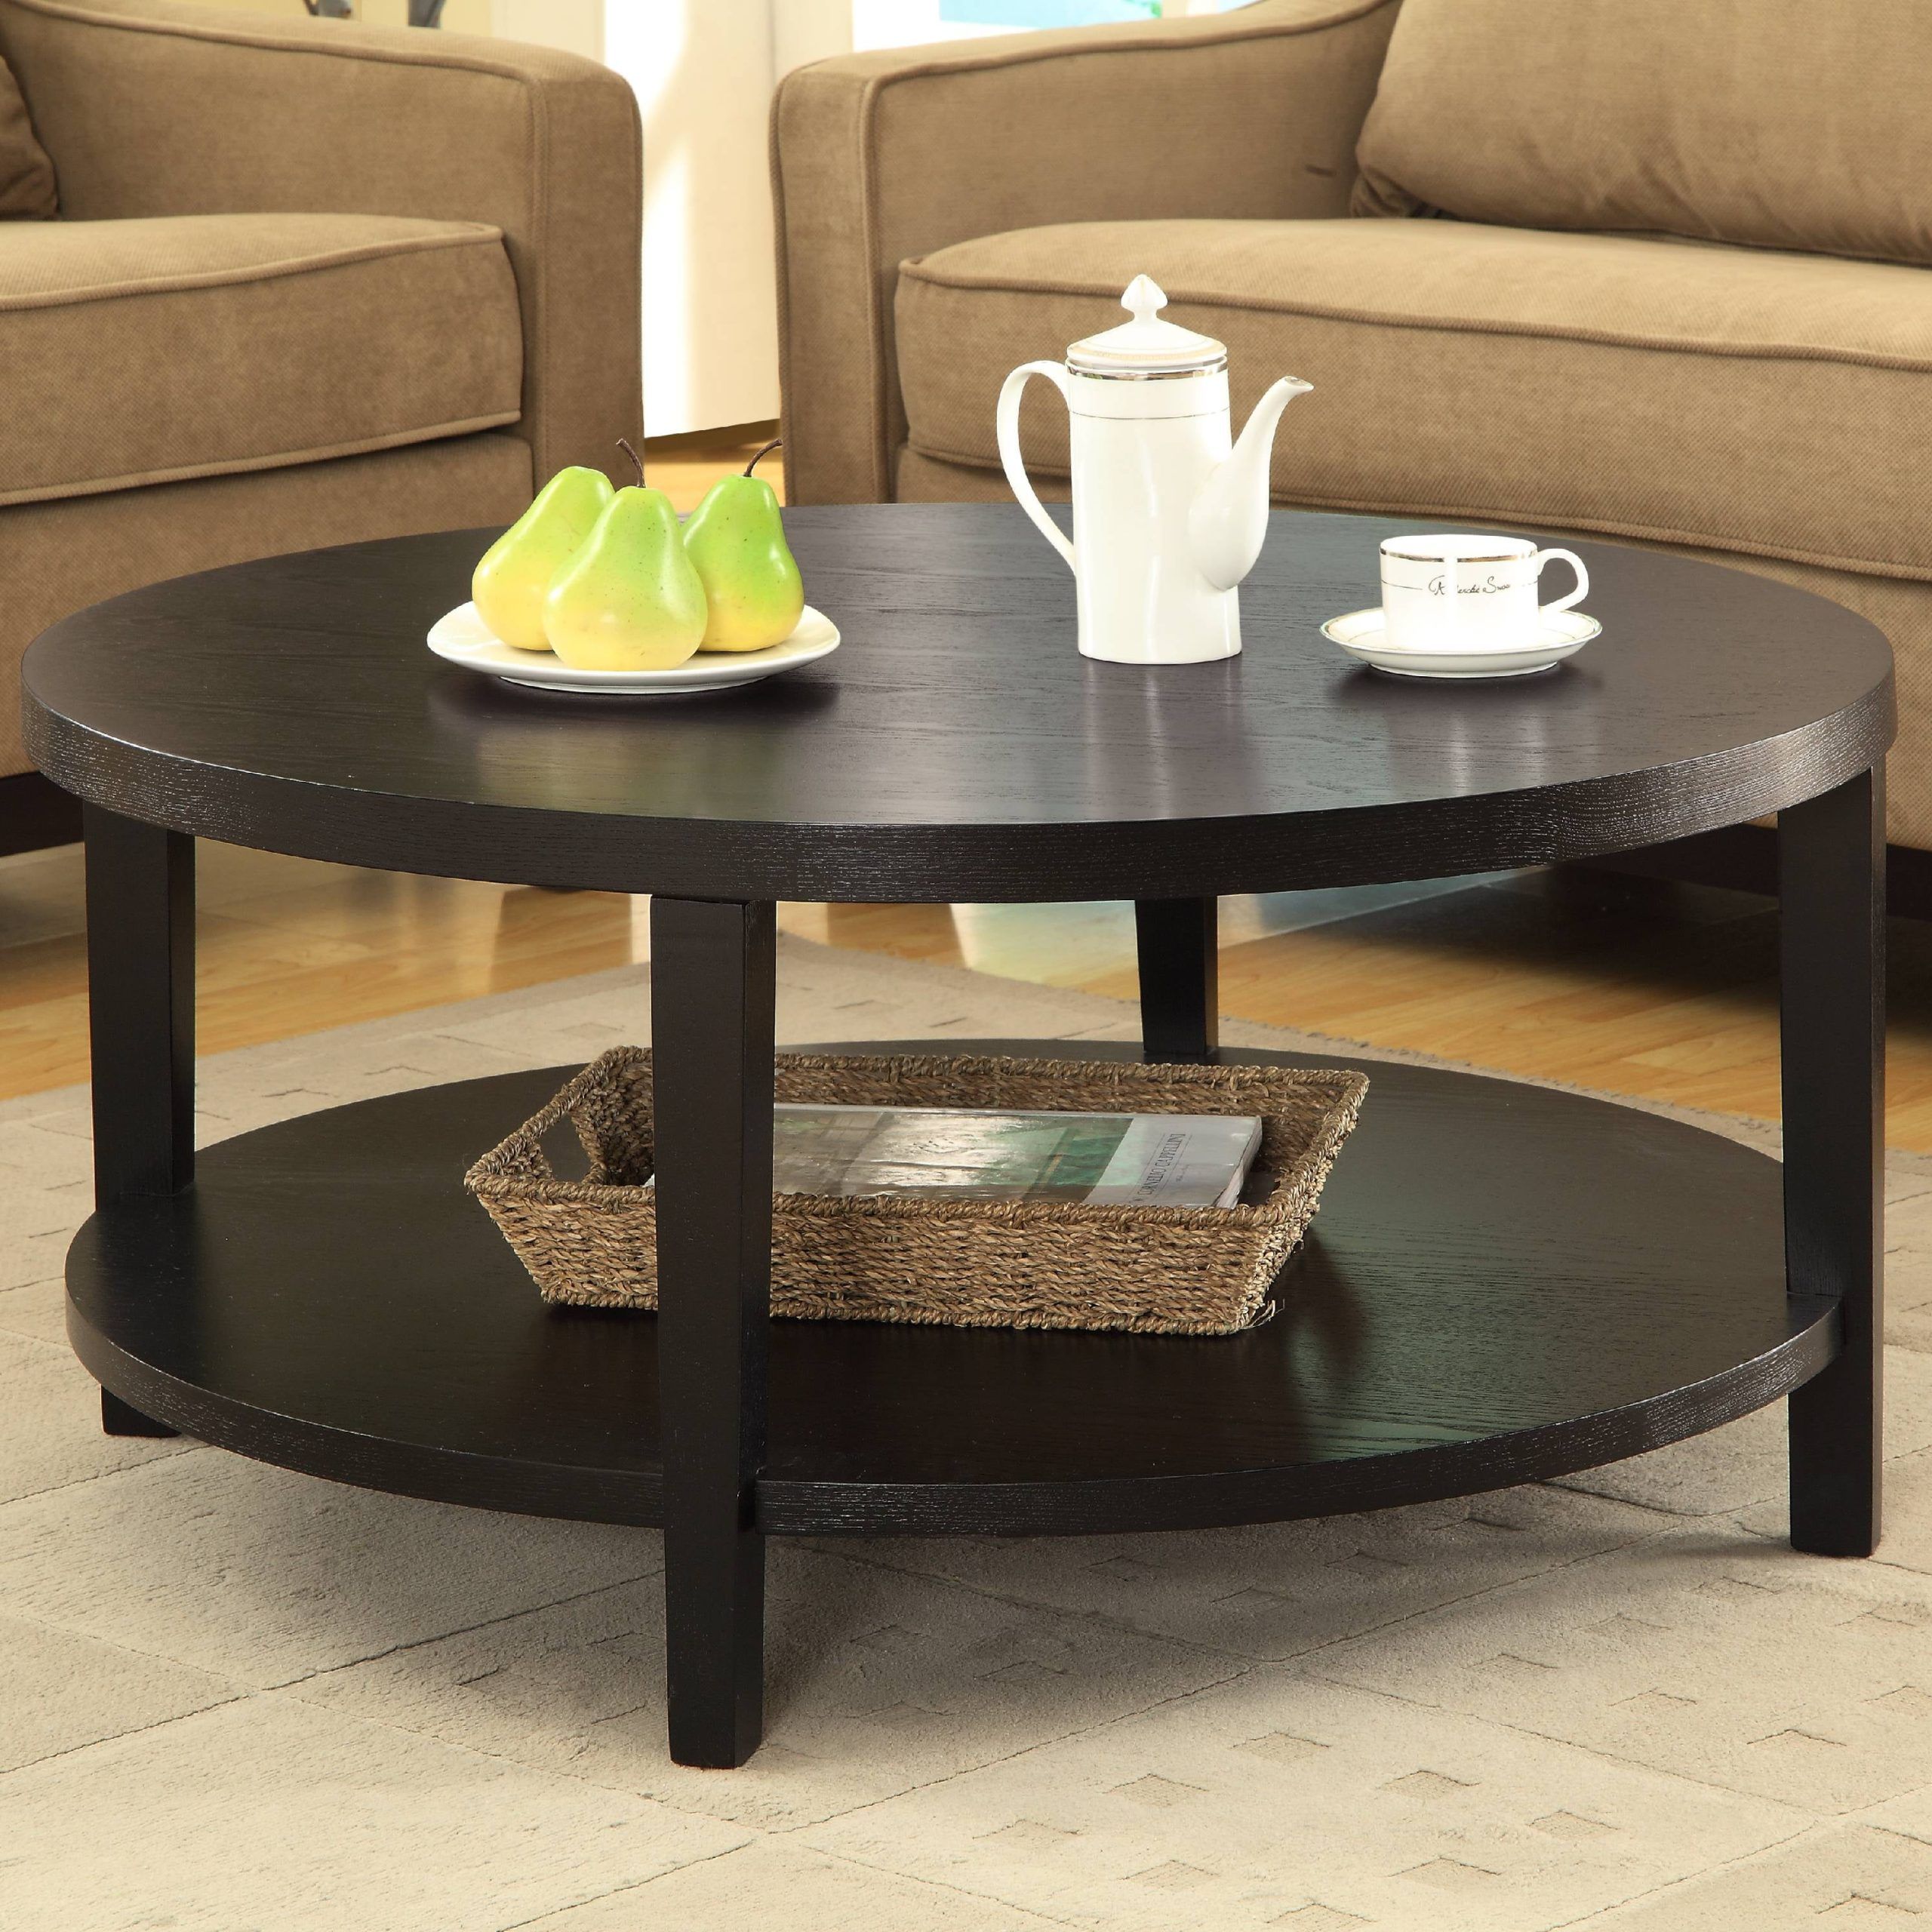 Espresso Round Coffee Table – Southern Enterprises Voyager Espresso Pertaining To Southern Enterprises Larksmill Coffee Tables (Gallery 19 of 20)